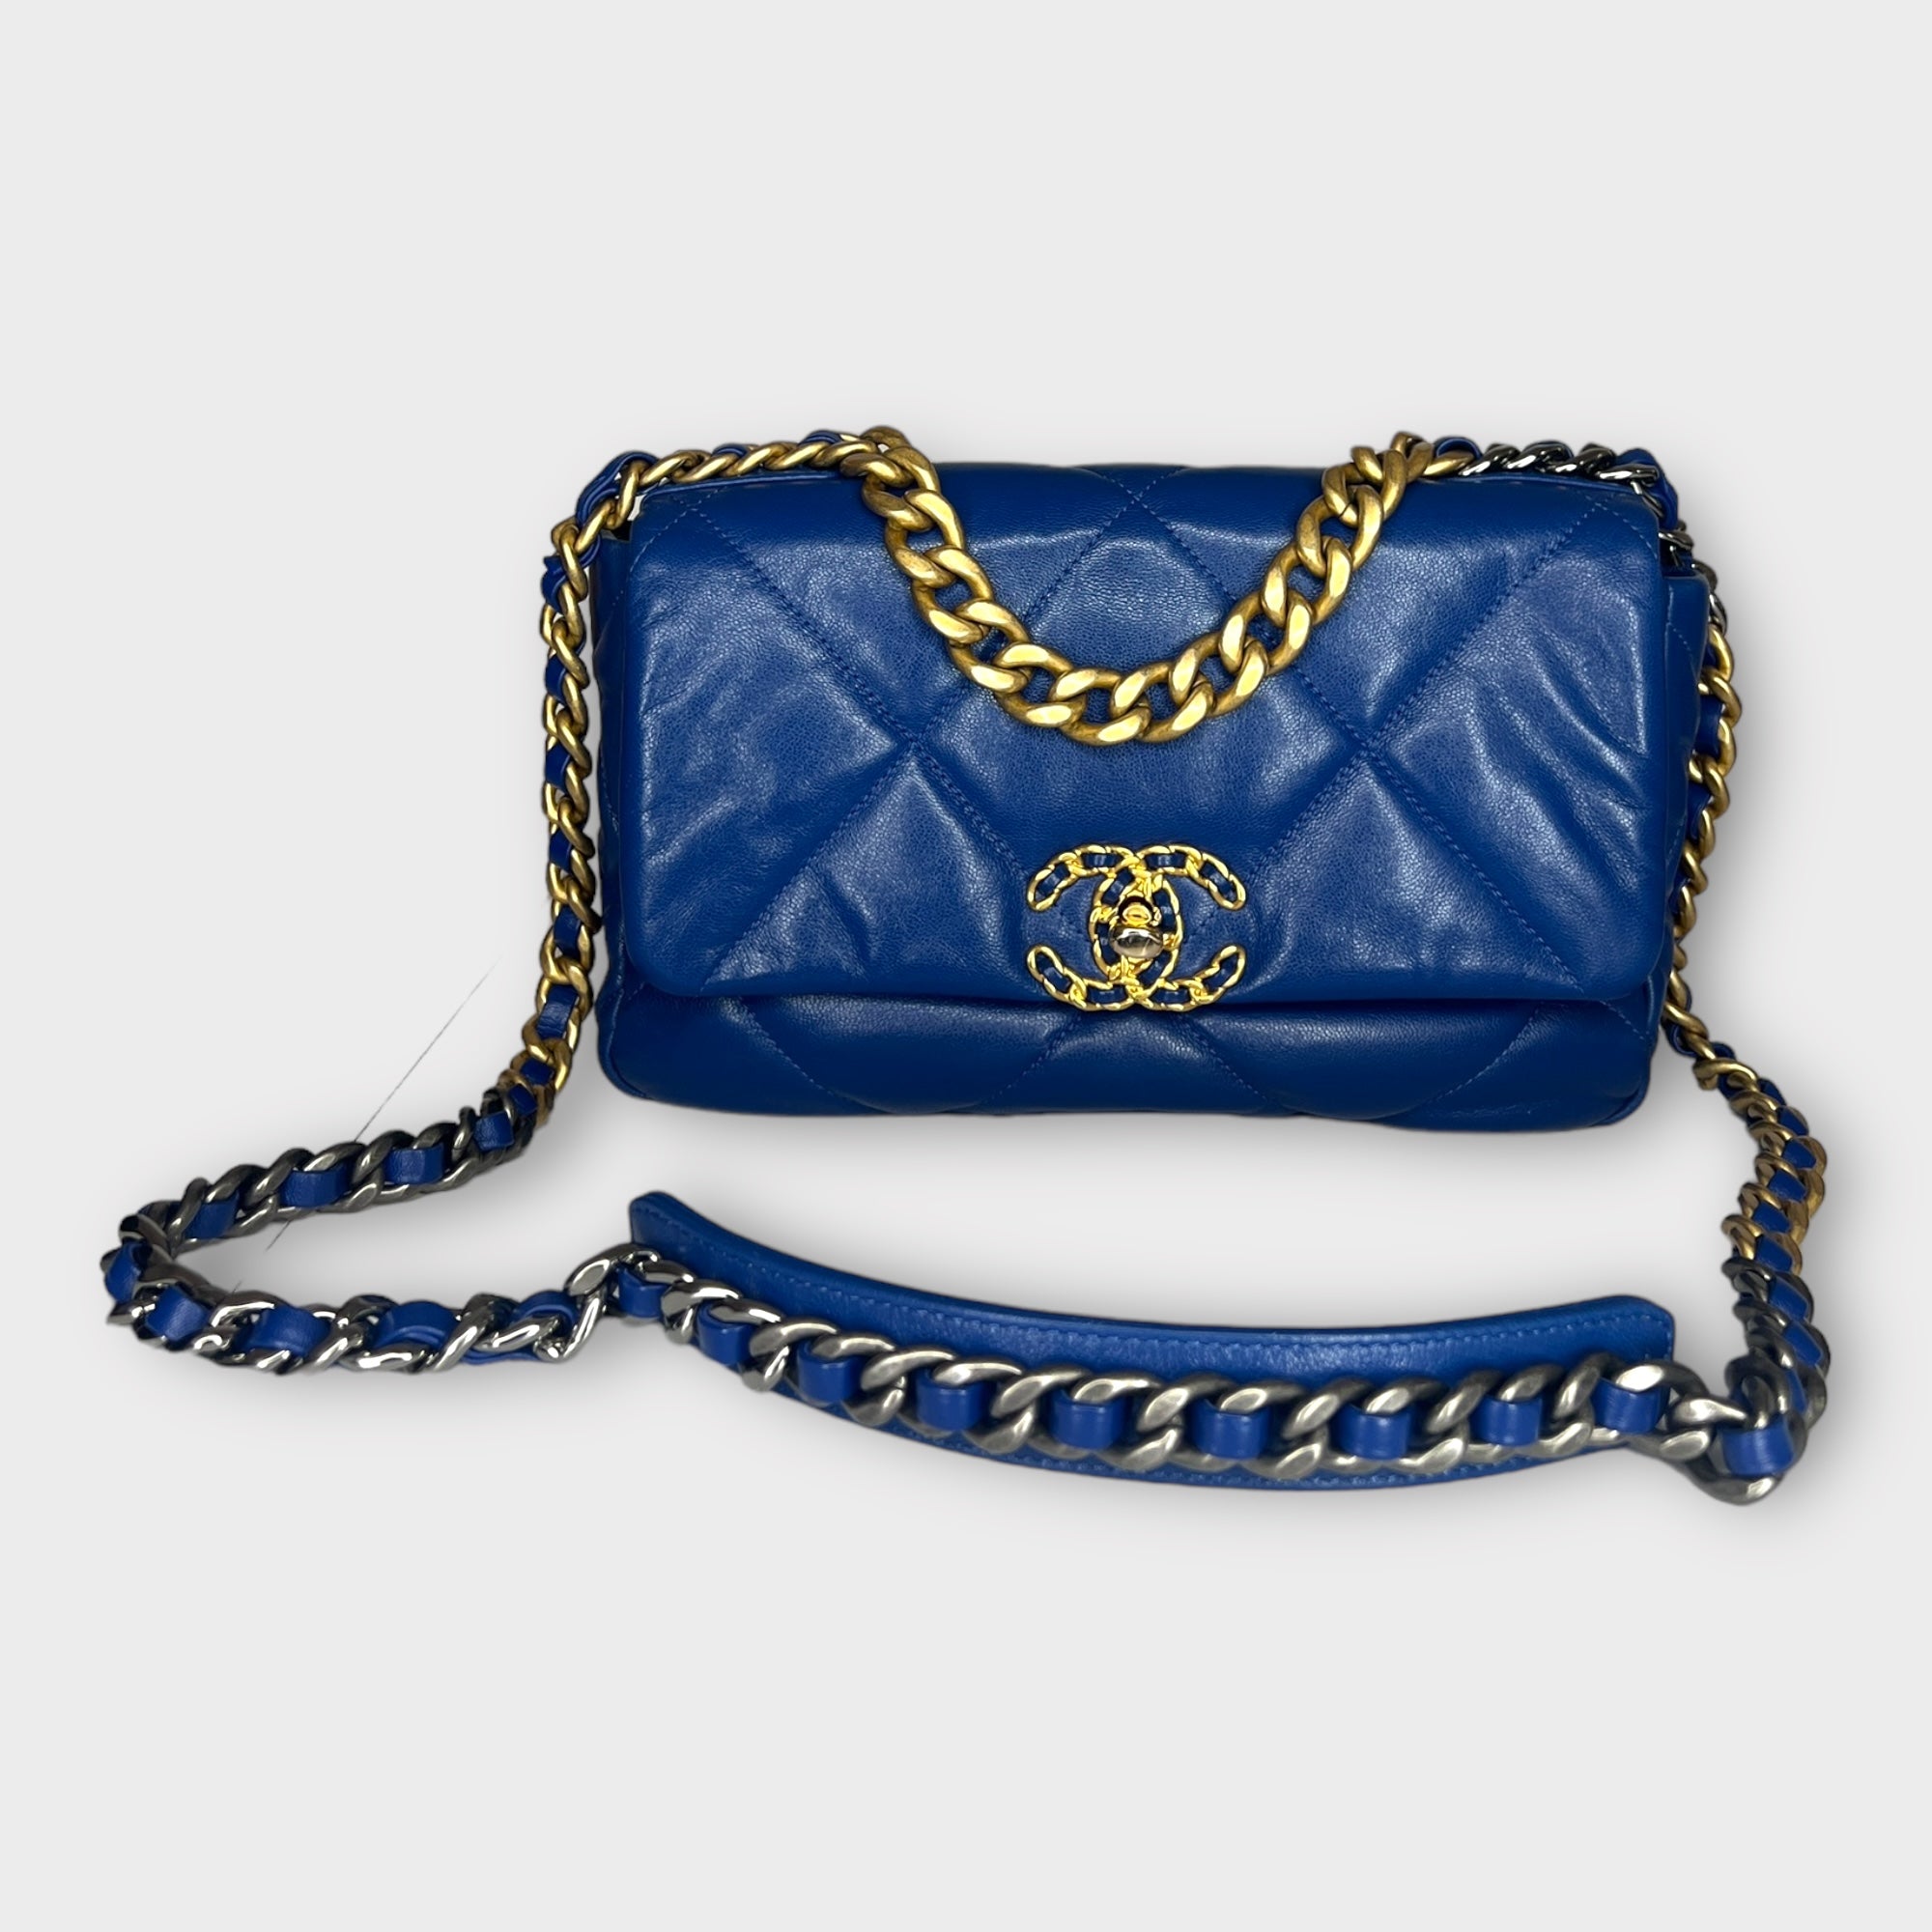 Chanel 19 in Blue Lambskin Leather, Small Bag